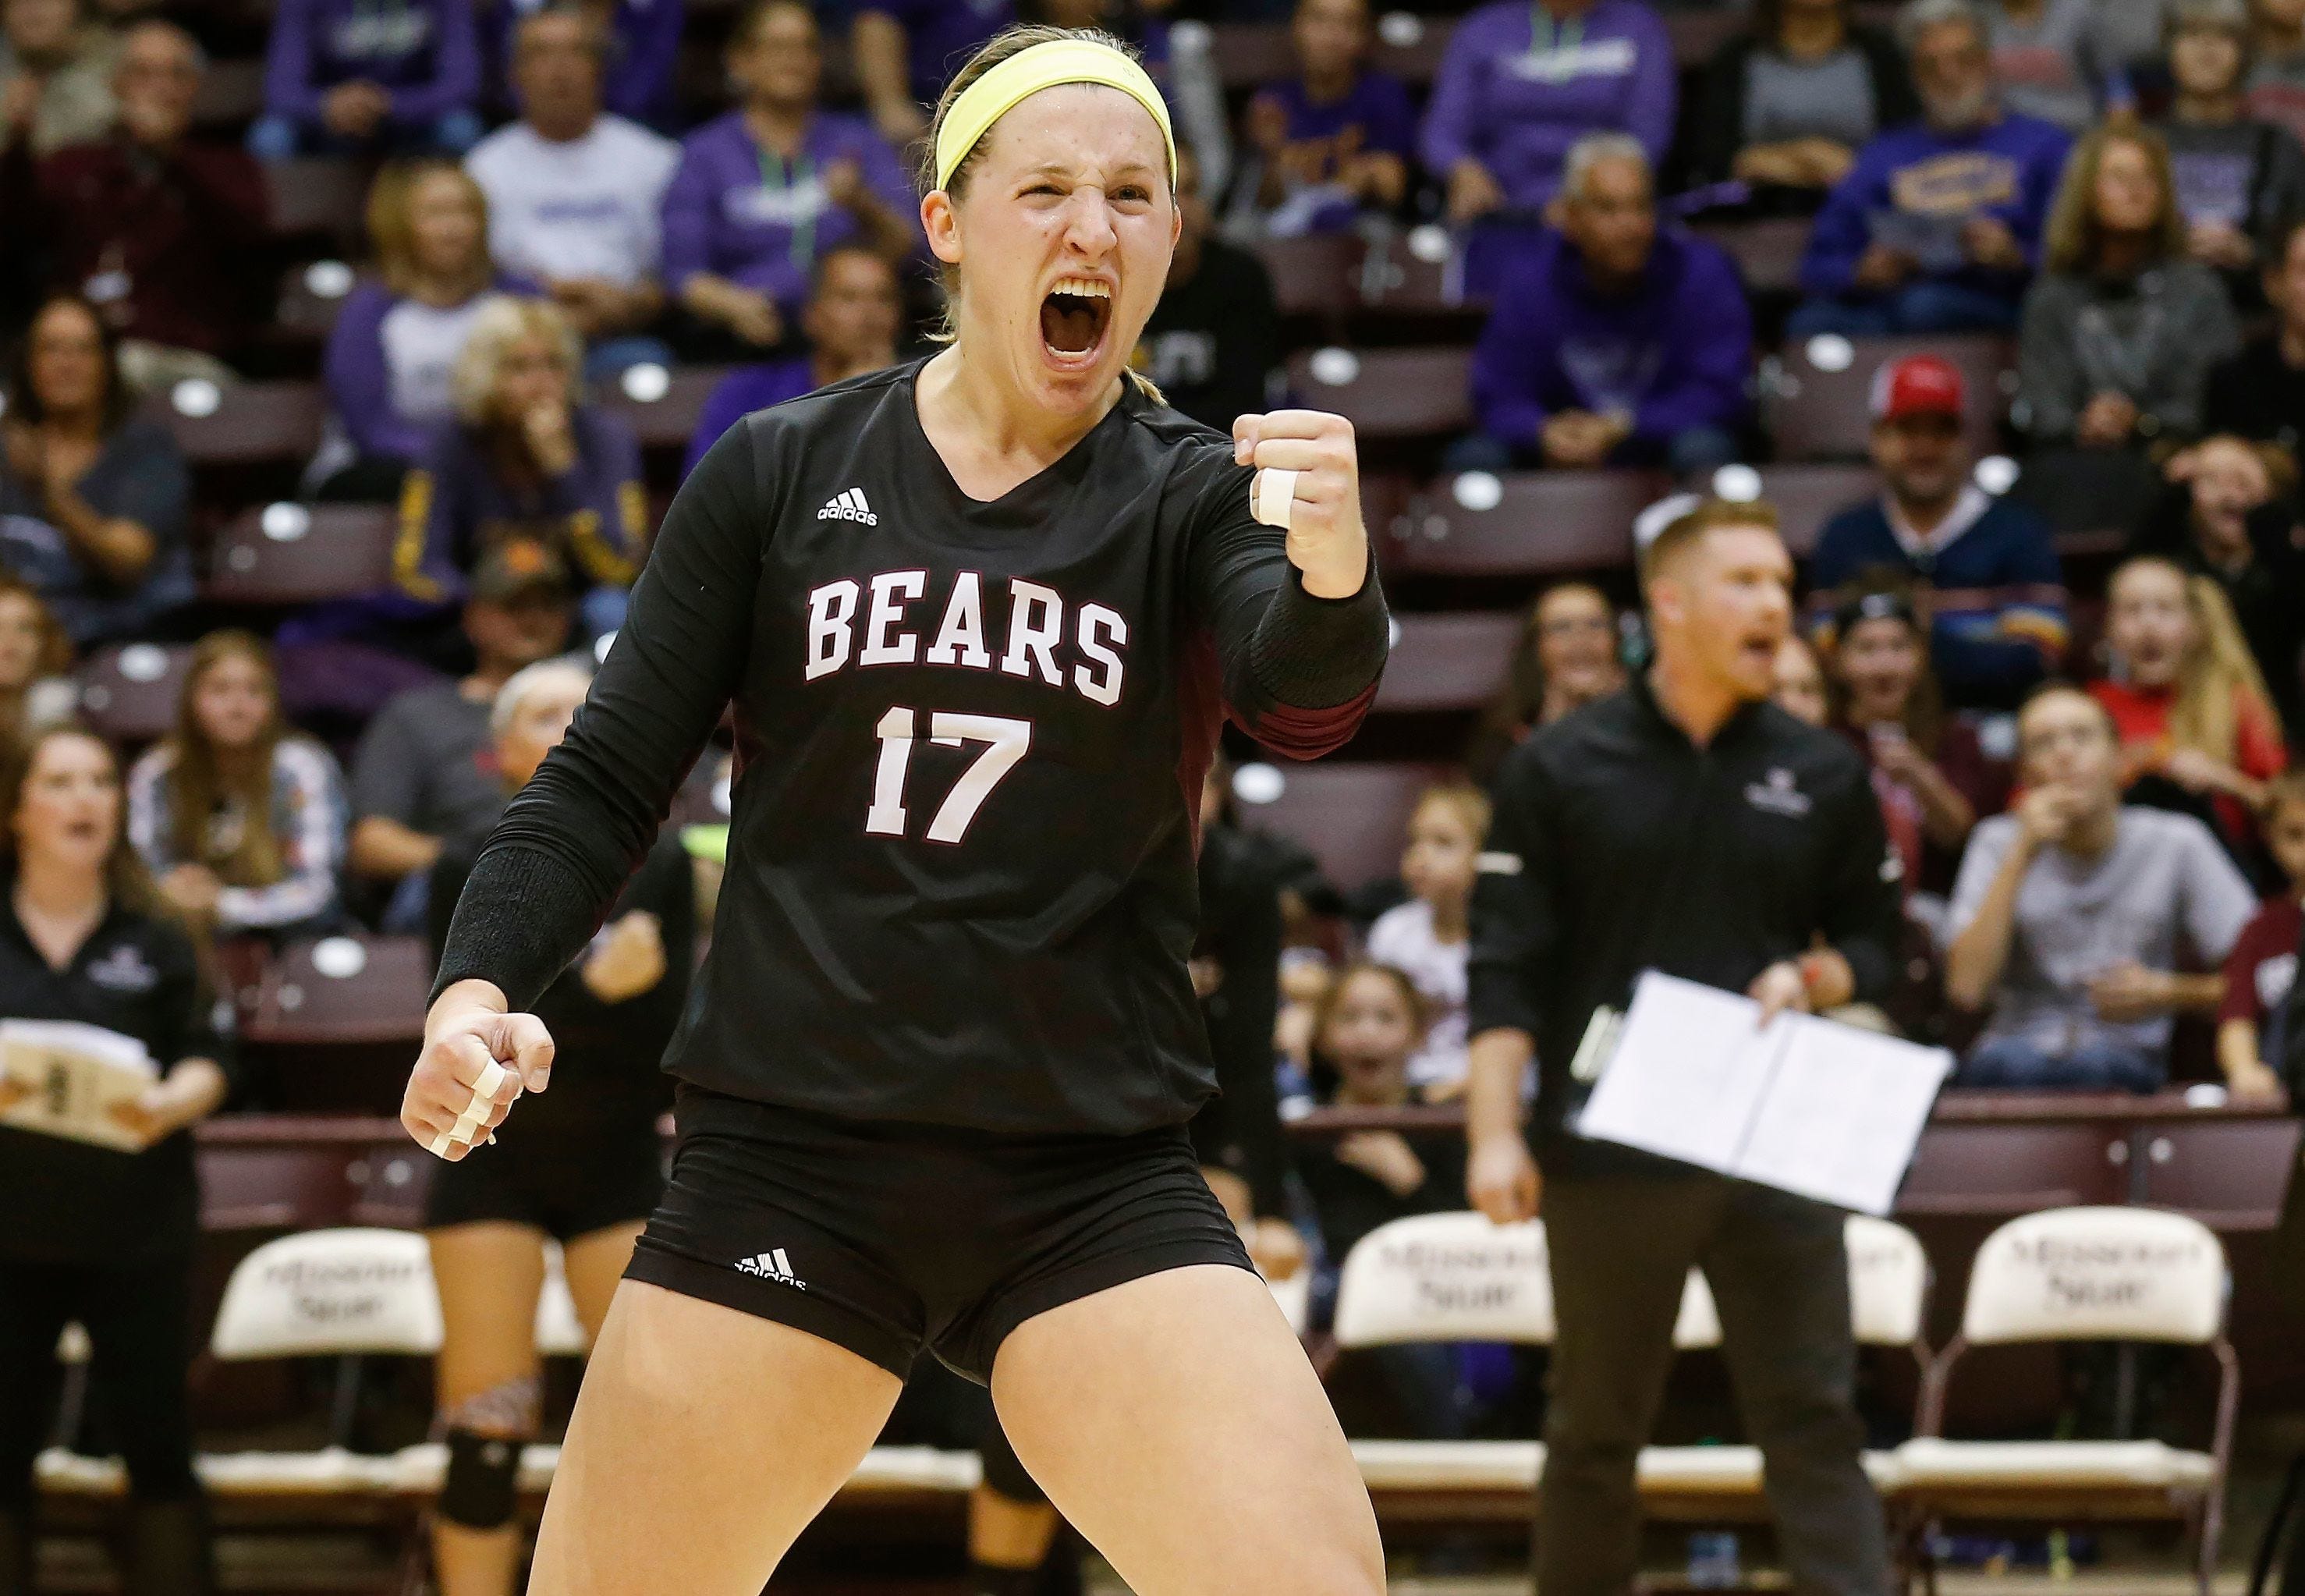 Former MSU star Lily Johnson was a four-time All-American and ranked second nationally in kills her senior season.